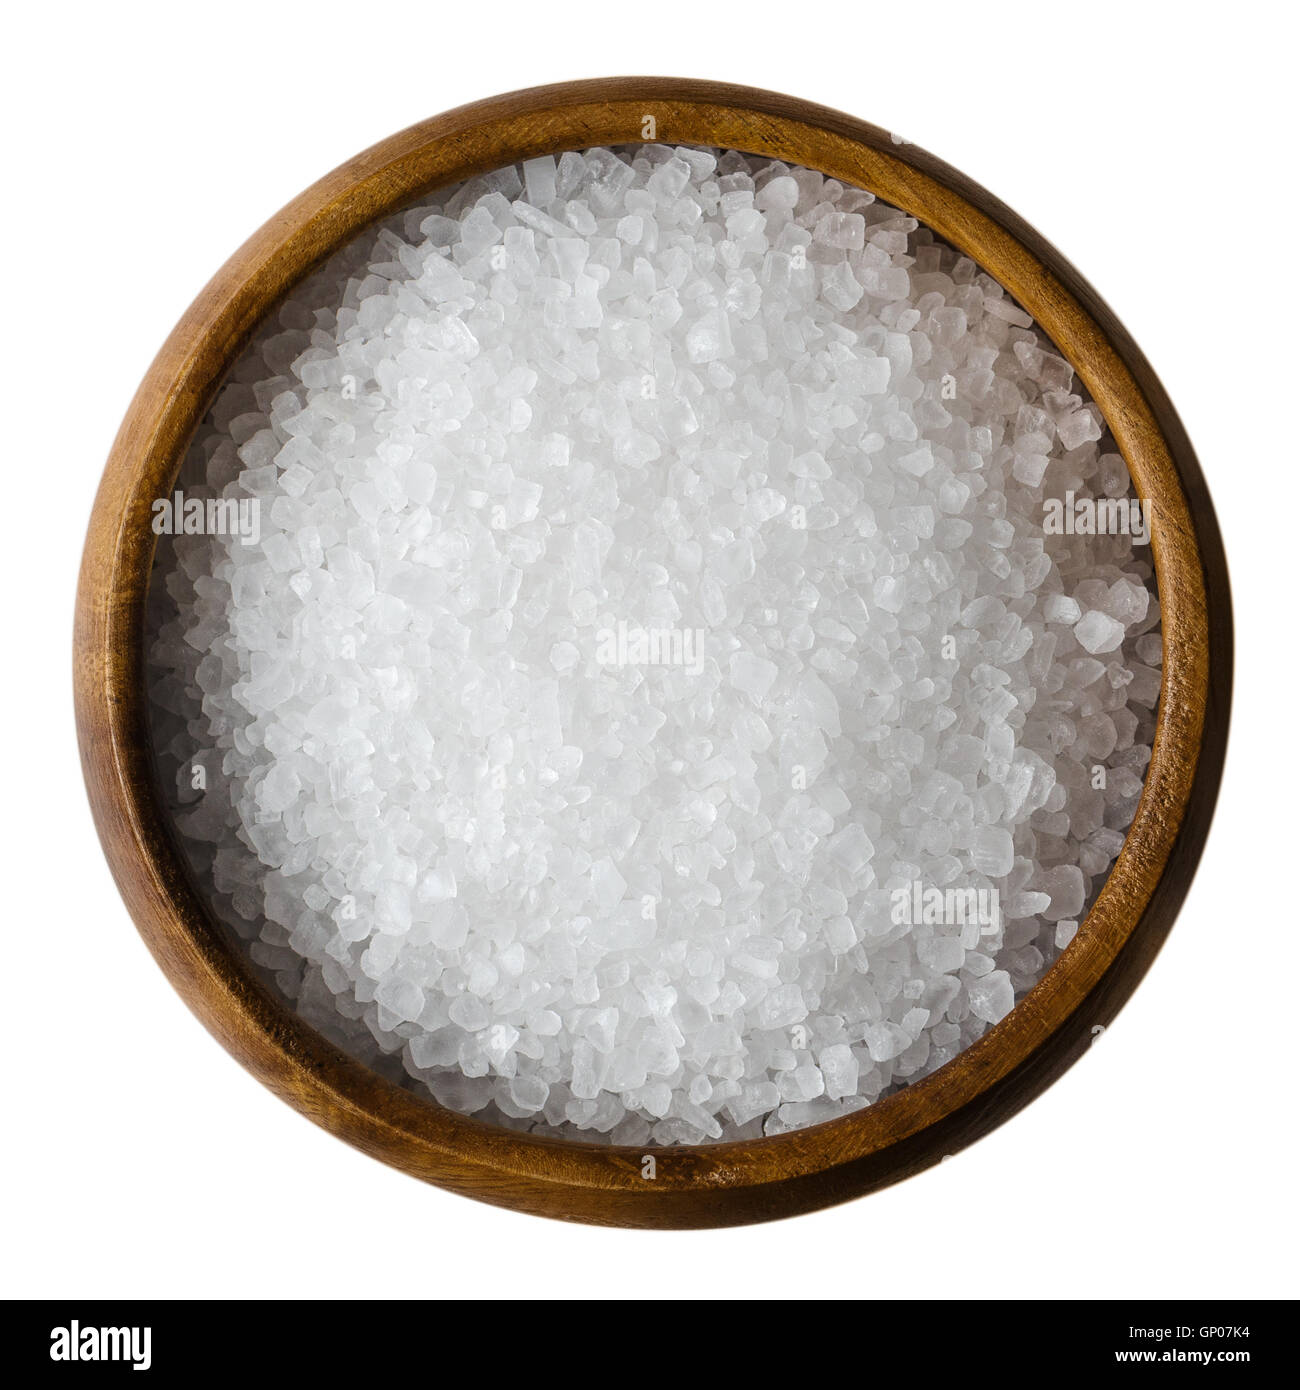 Sea salt in a wooden bowl on white background. Also called bay salt or solar salt, is used in cooking and cosmetics. Stock Photo